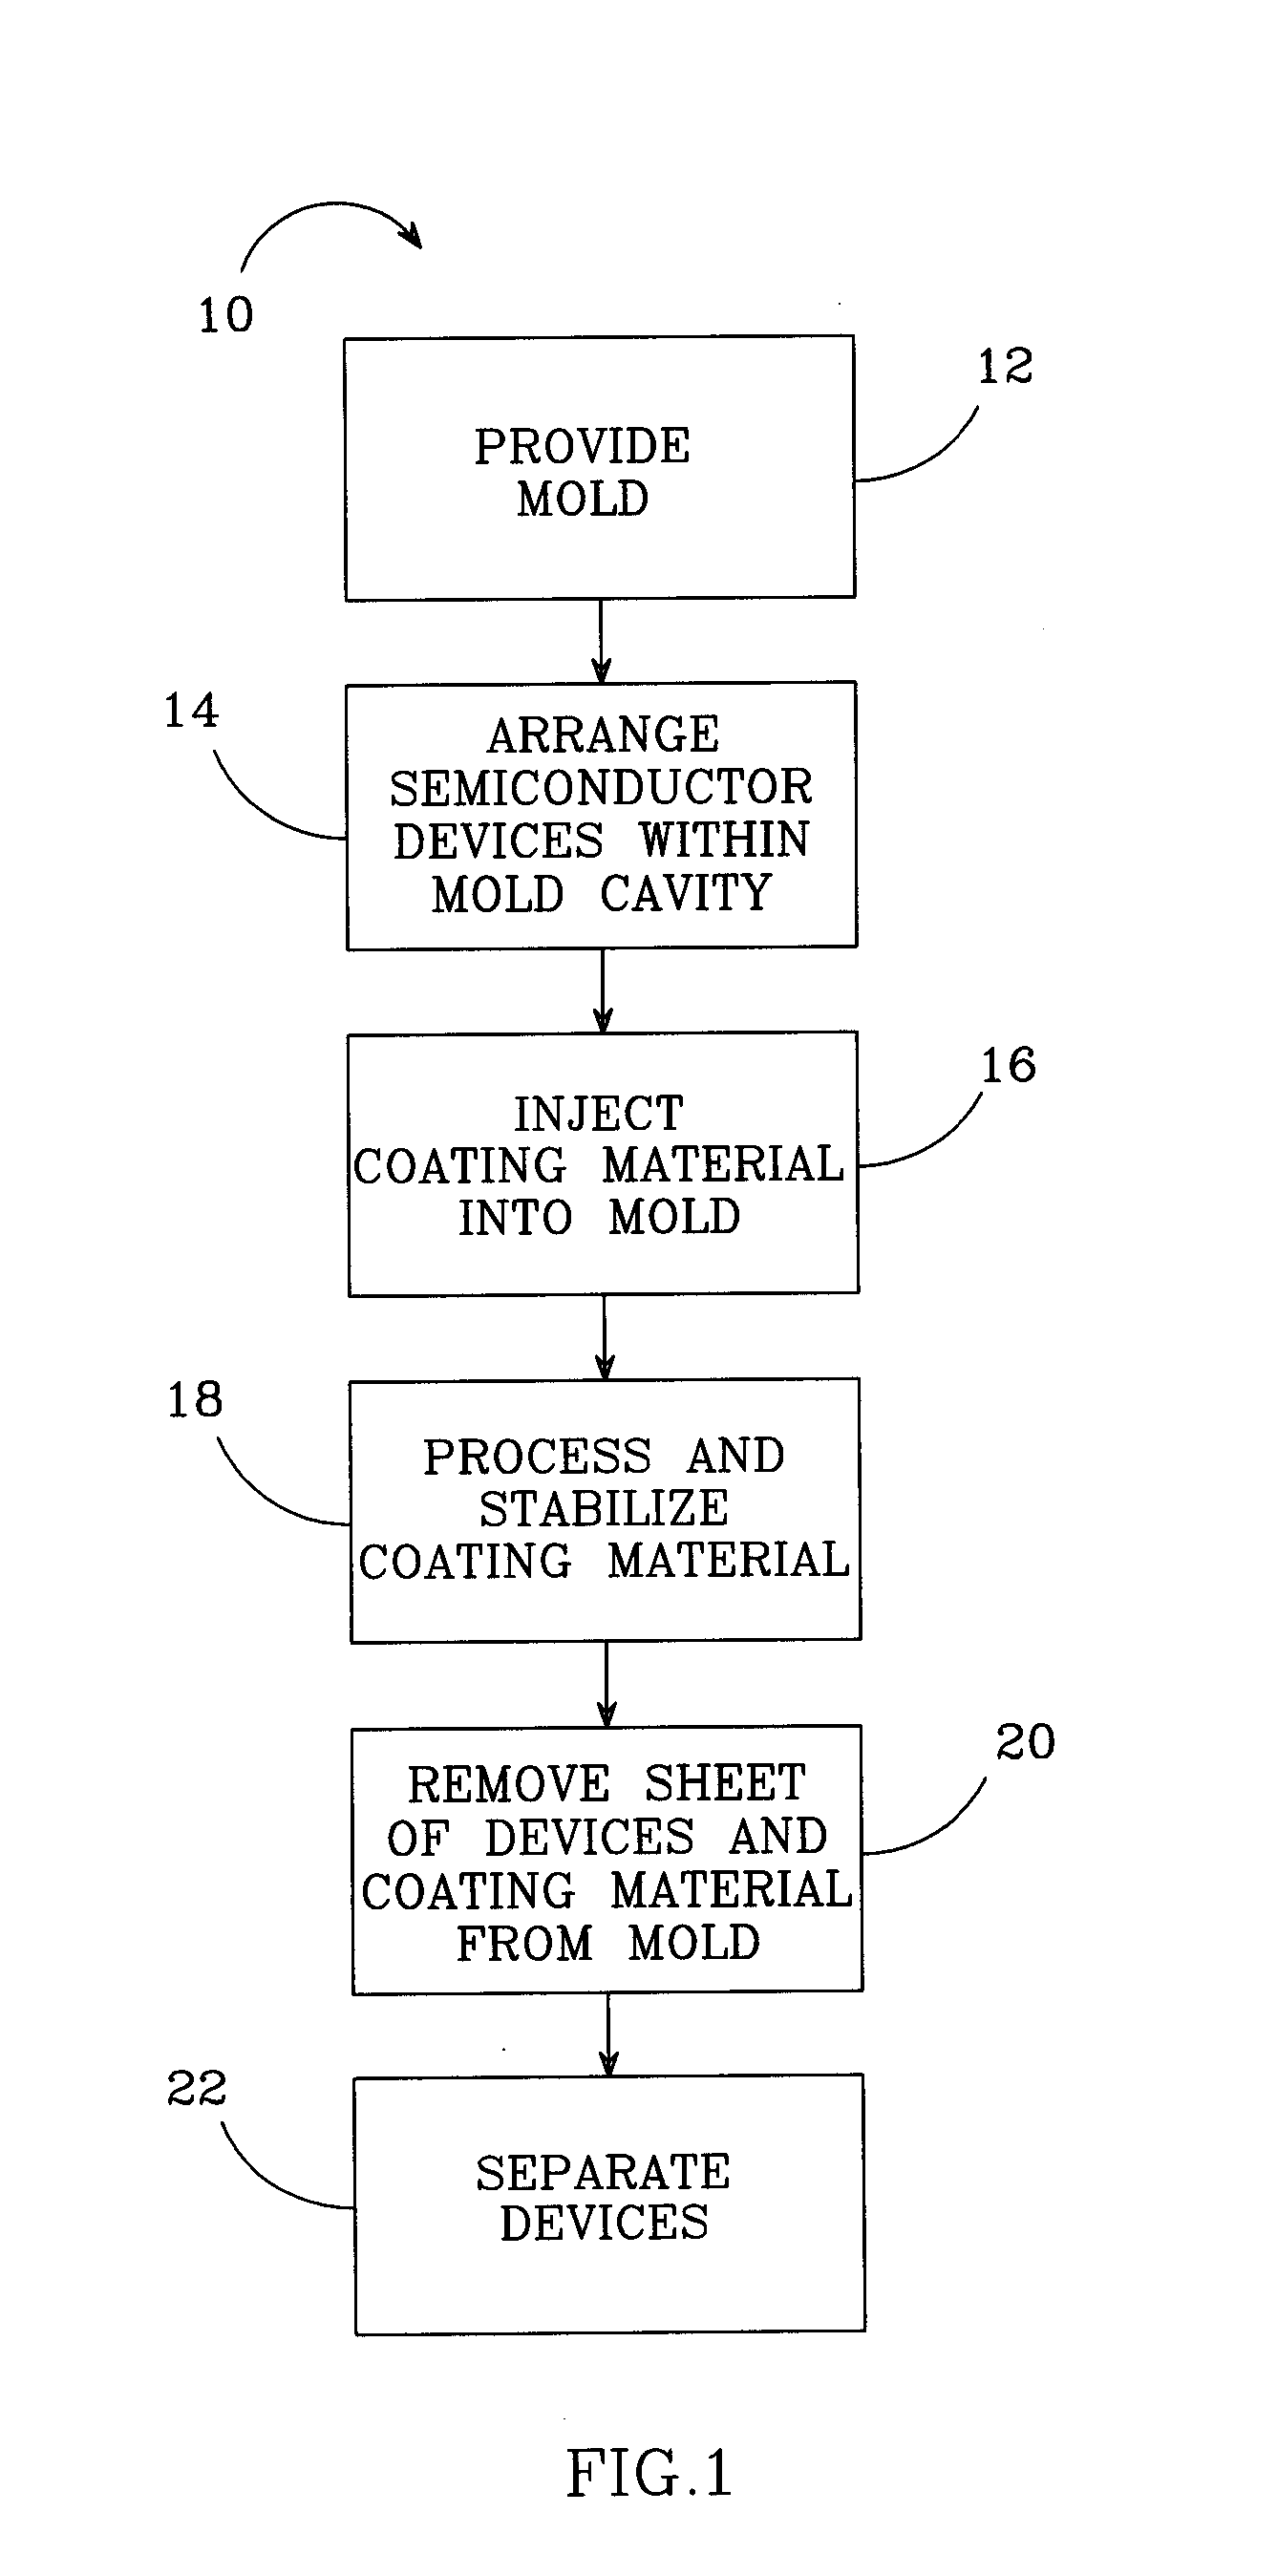 Molded chip fabrication method and apparatus